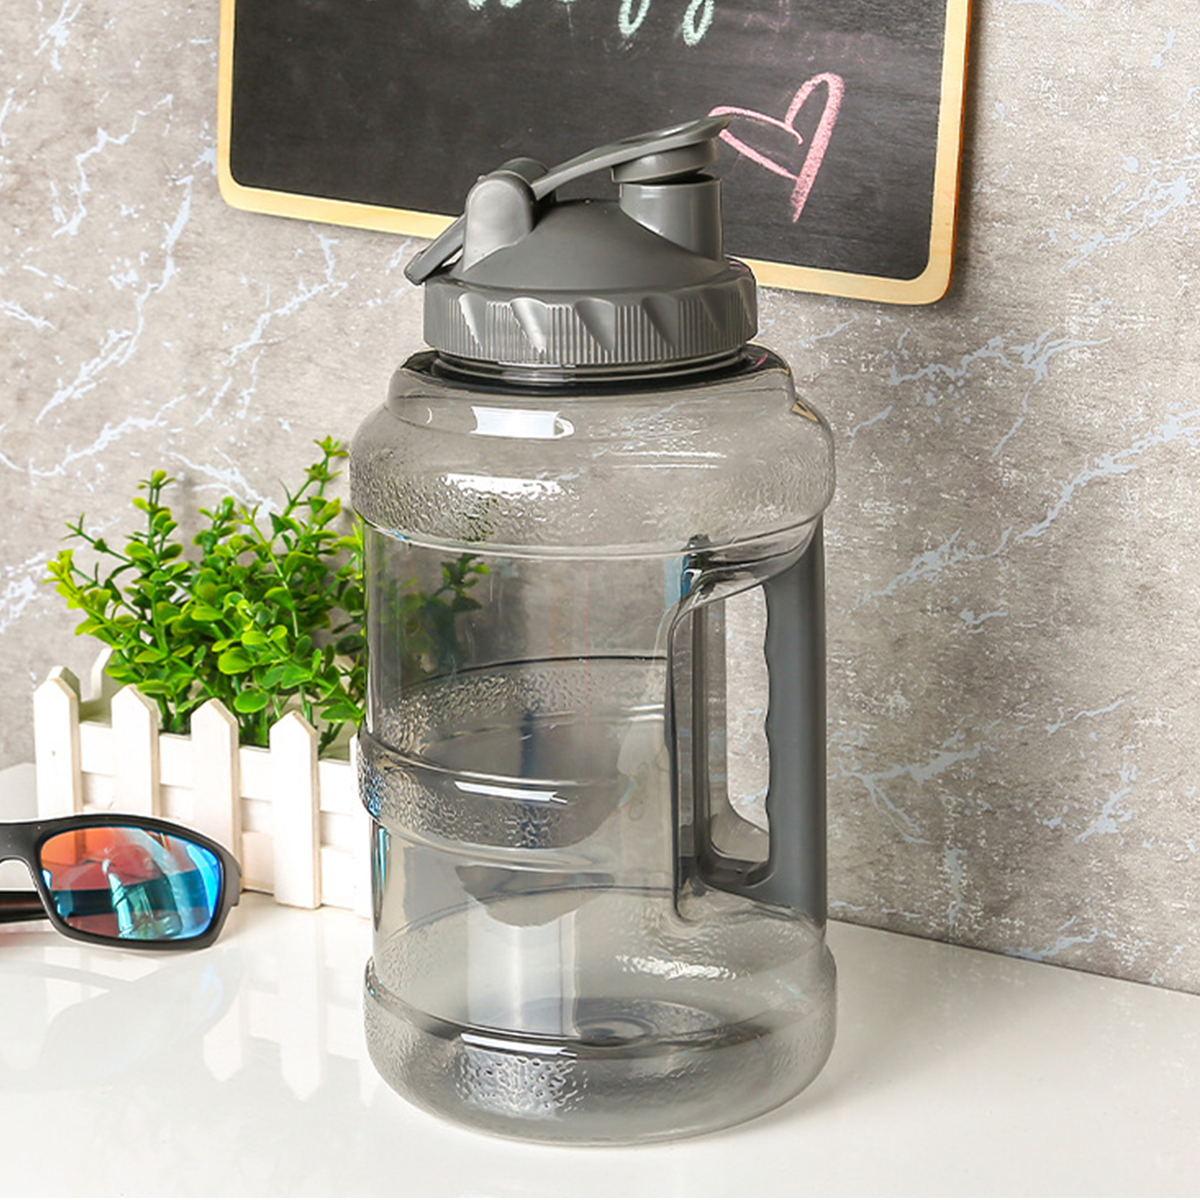 25L-BPA-Free-Water-Bottle-Sport-Gym-Training-Drinking-Kettles-Outdoor-Camping-Travel-1803202-7